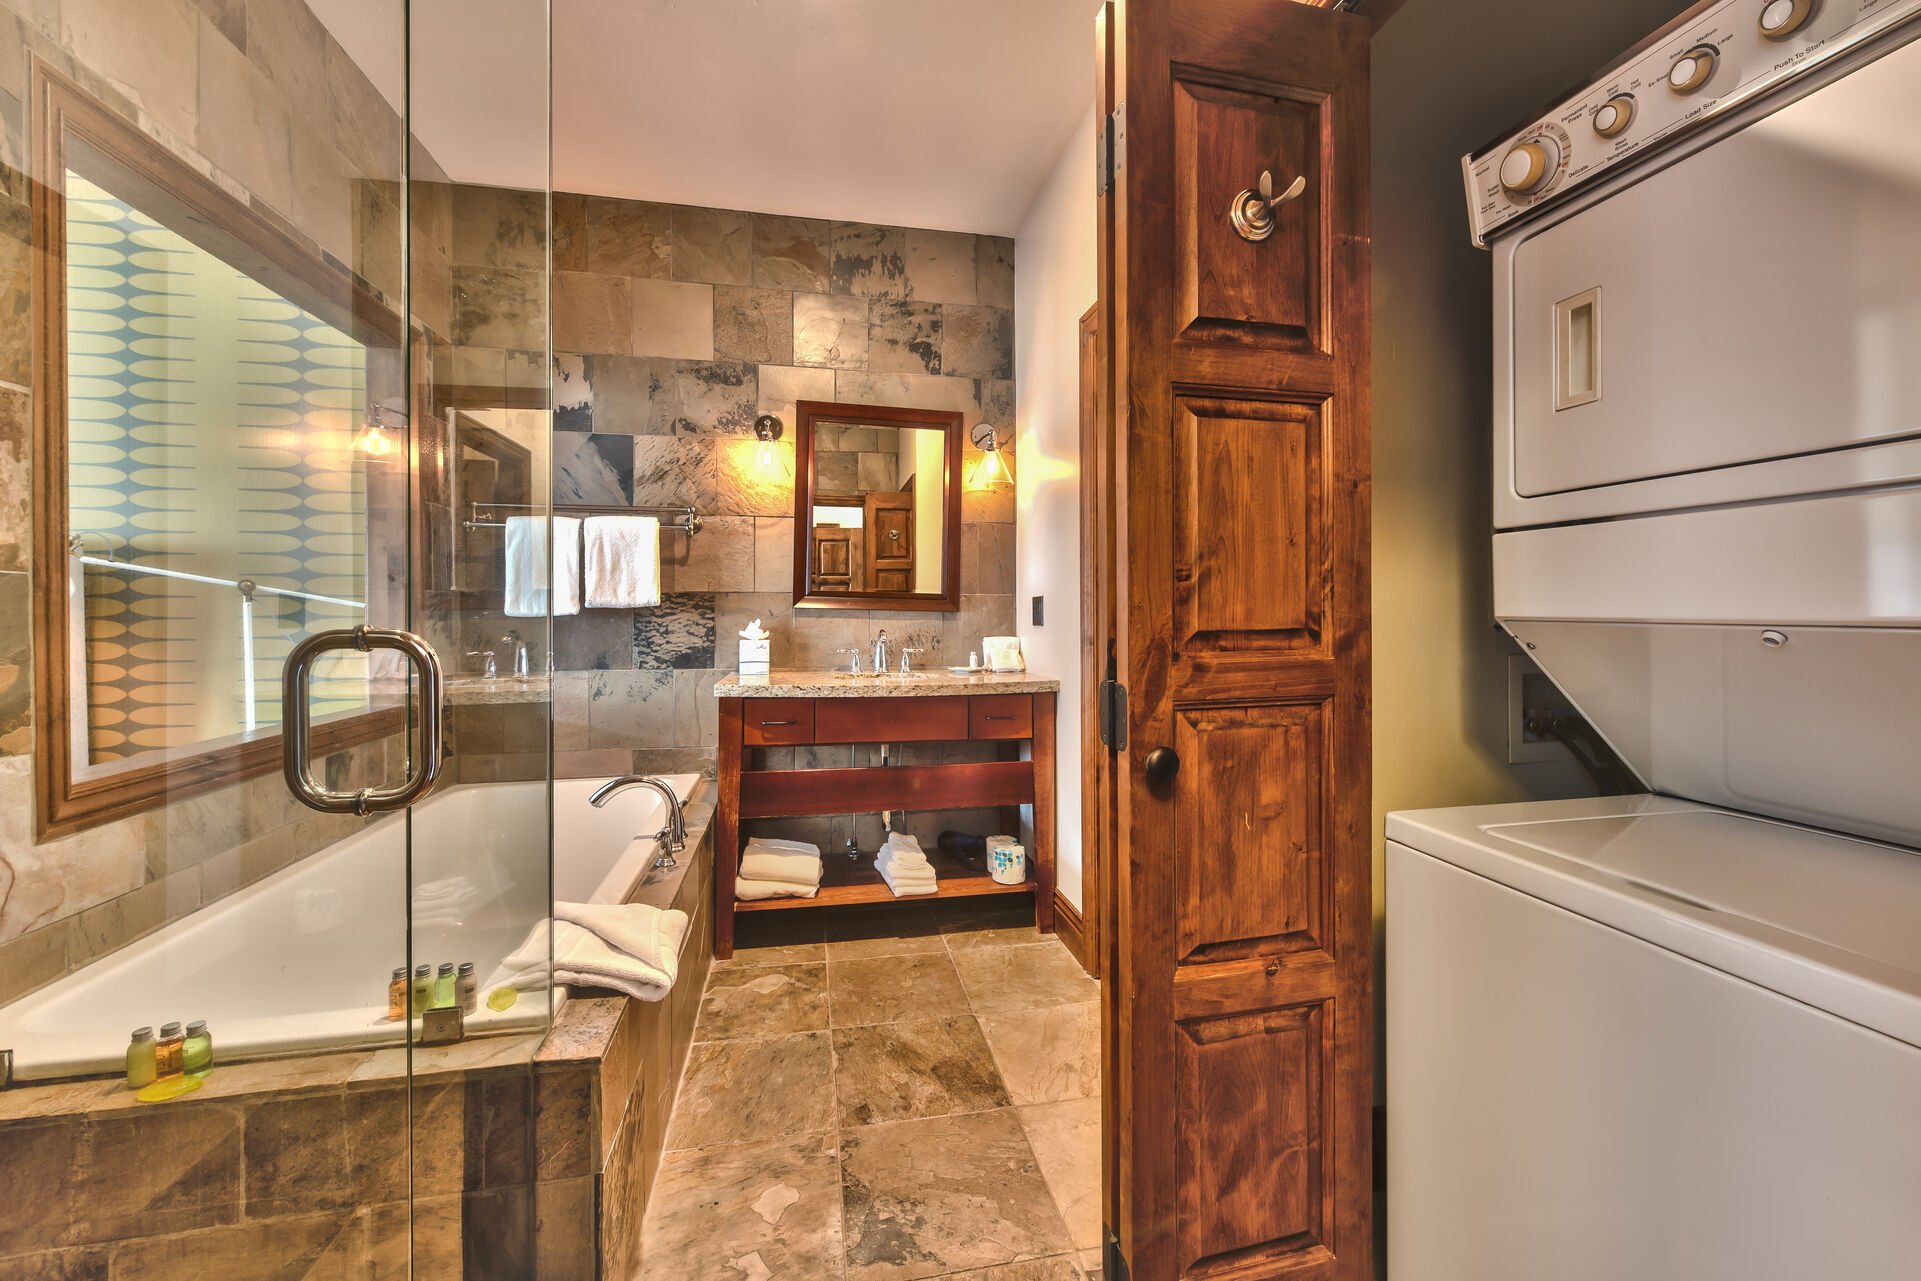 Master Bathroom 2 with a Granite Counter Vanity, a Stone Shower, and a Roman Soaking Tub